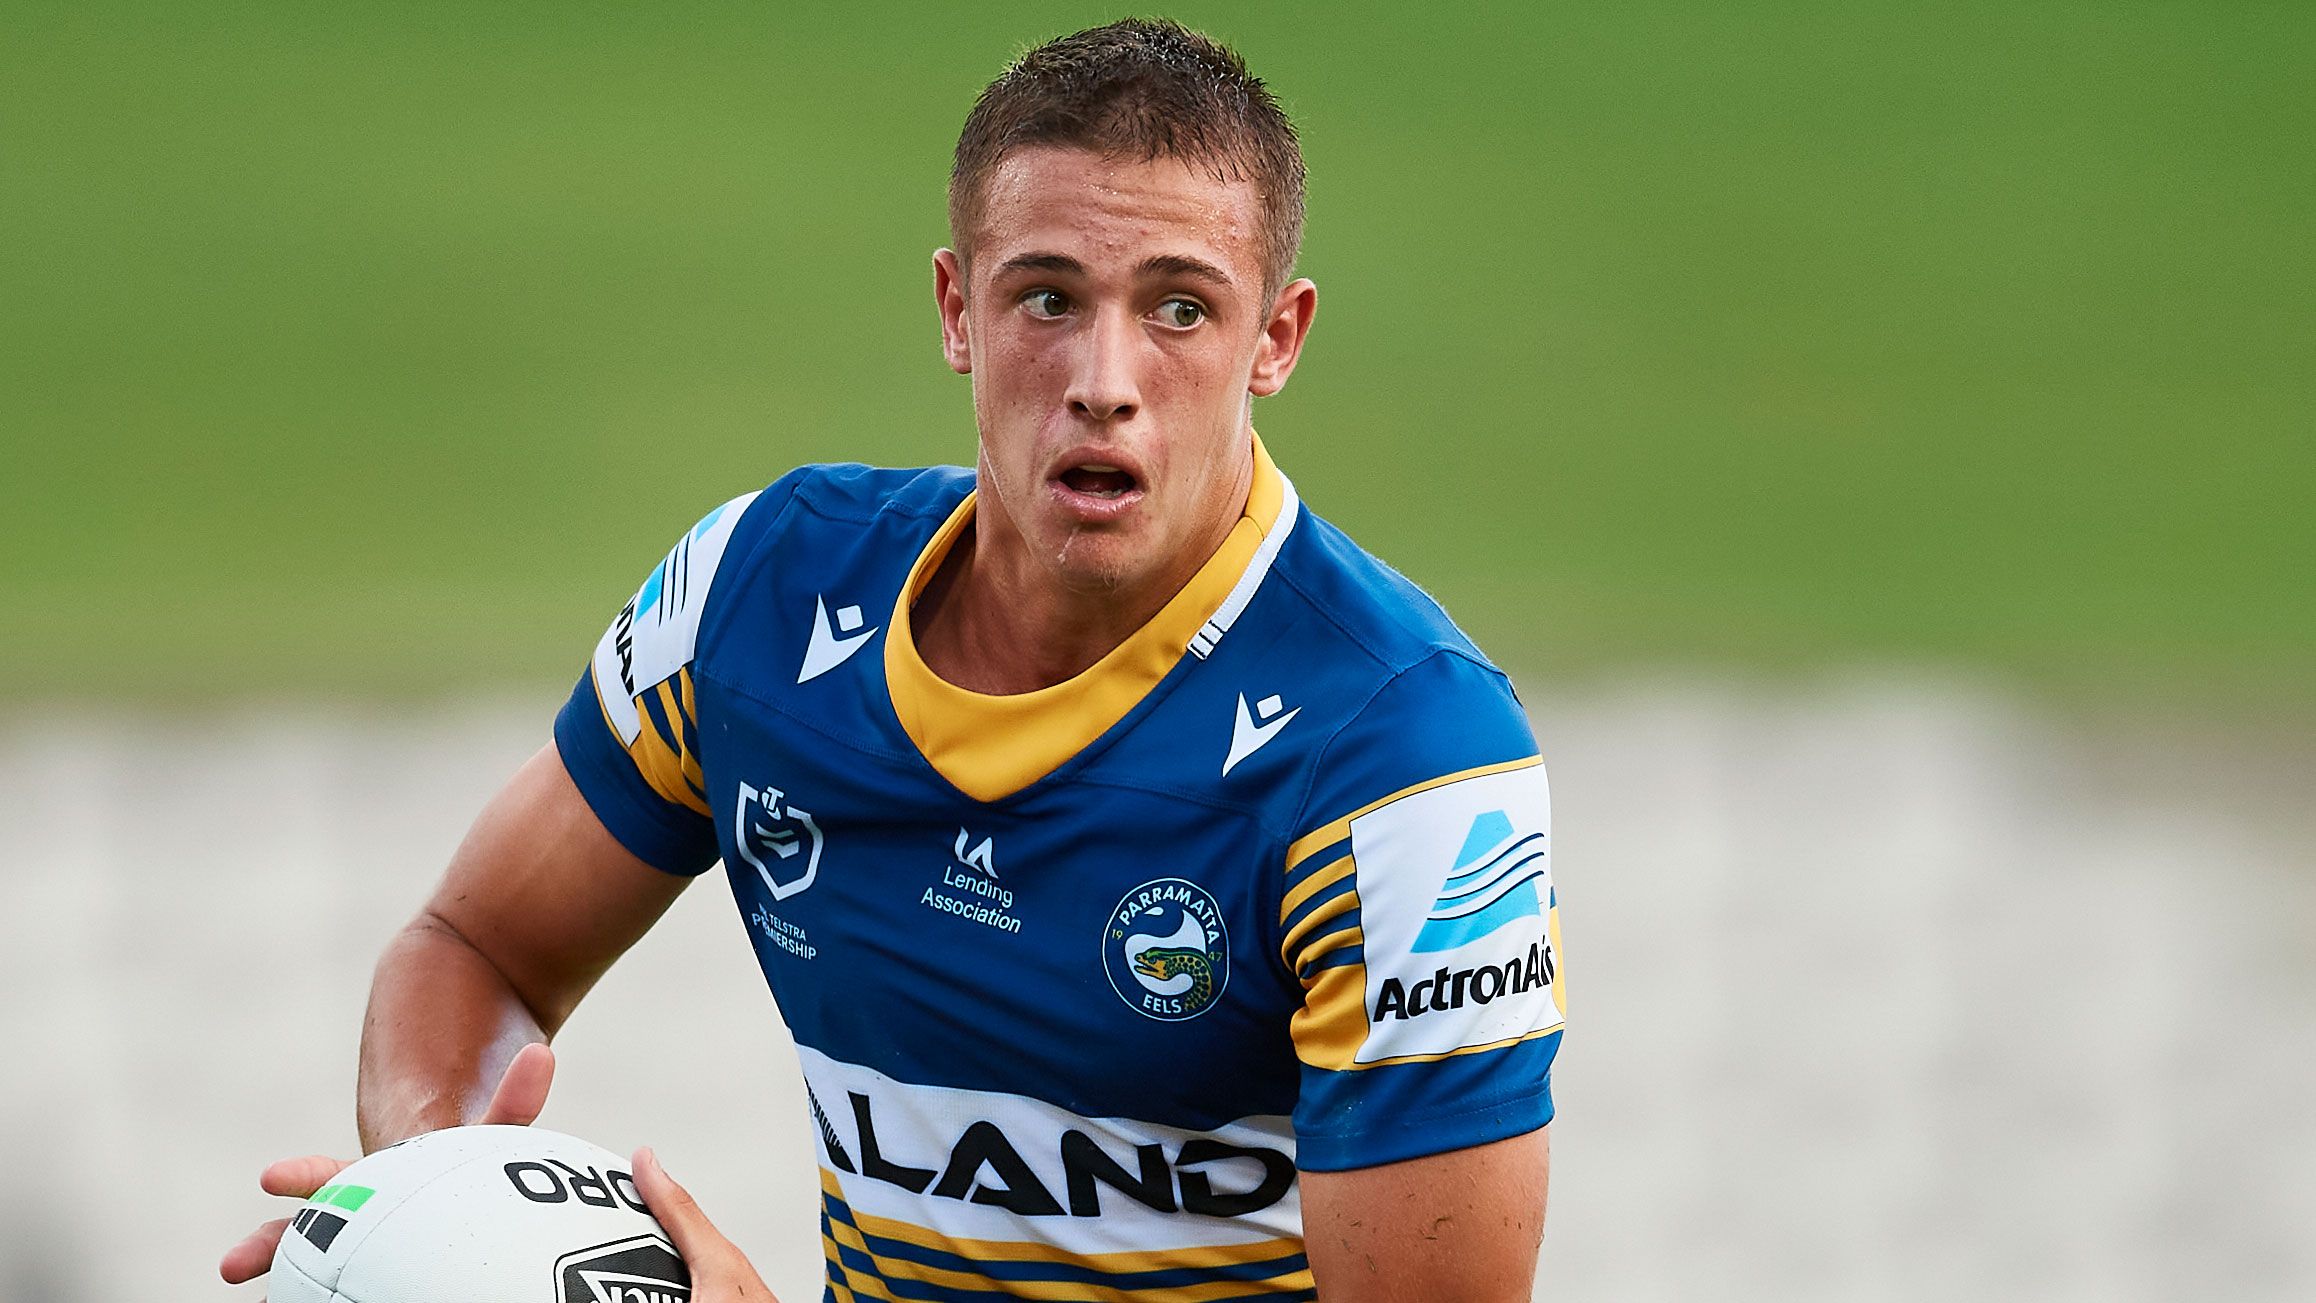 Parramatta Eels upgrade Brad Arthur's son Jake into NRL top 30 squad in time for Magic Round debut